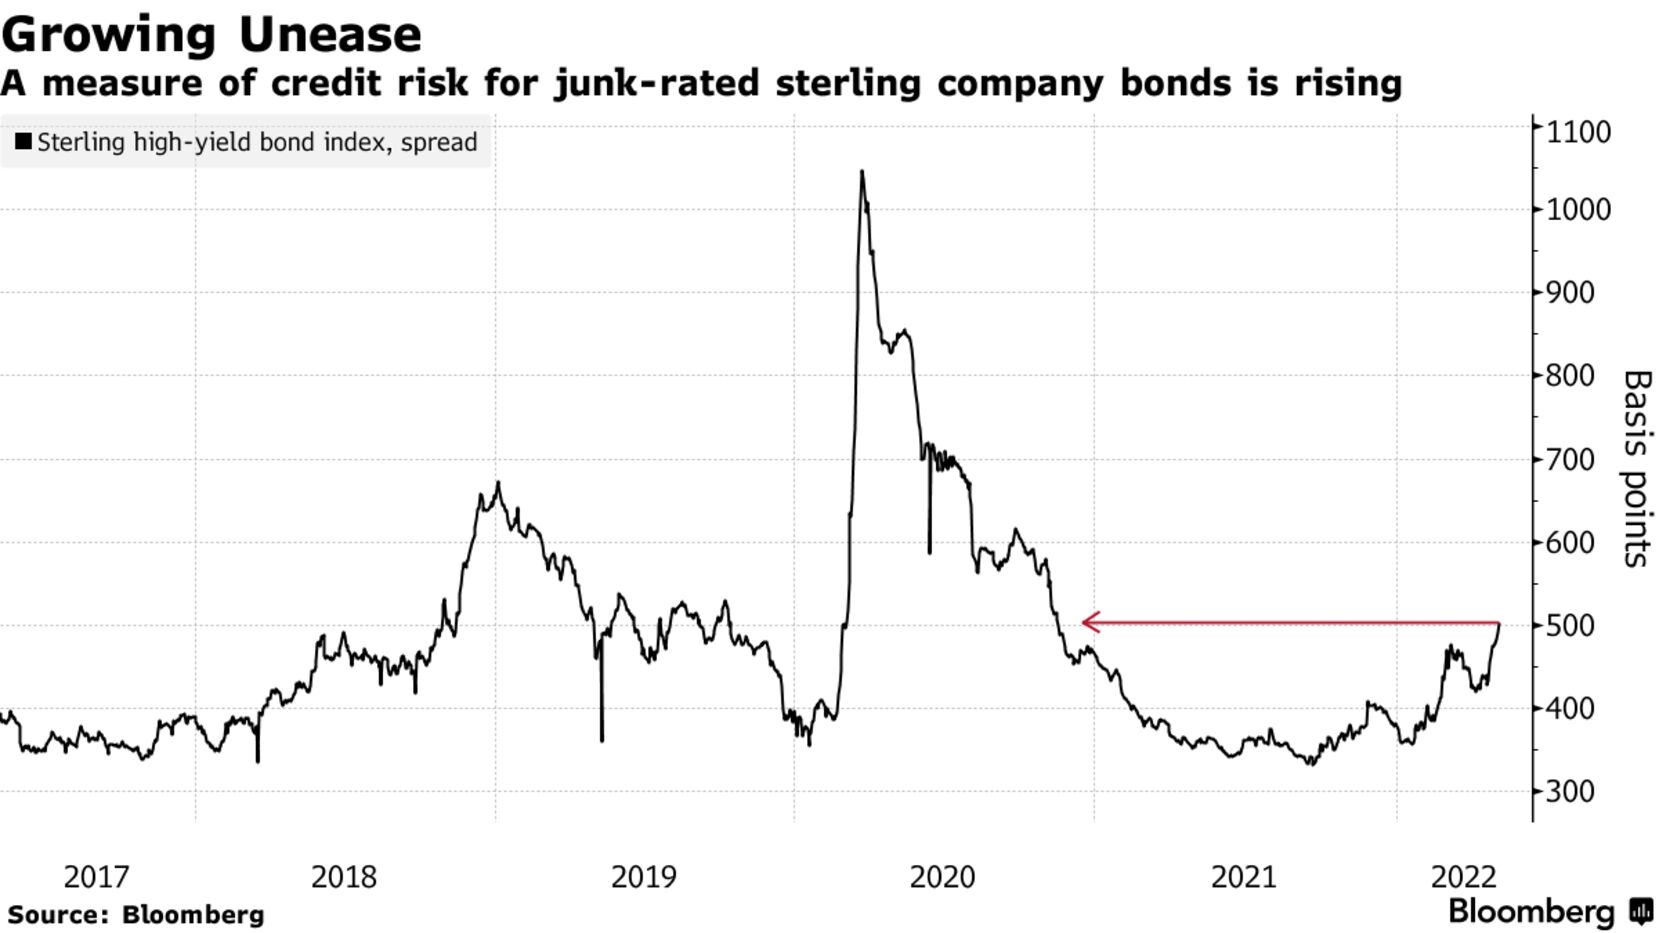 A measure of credit risk for junk-rated sterling company bonds is rising